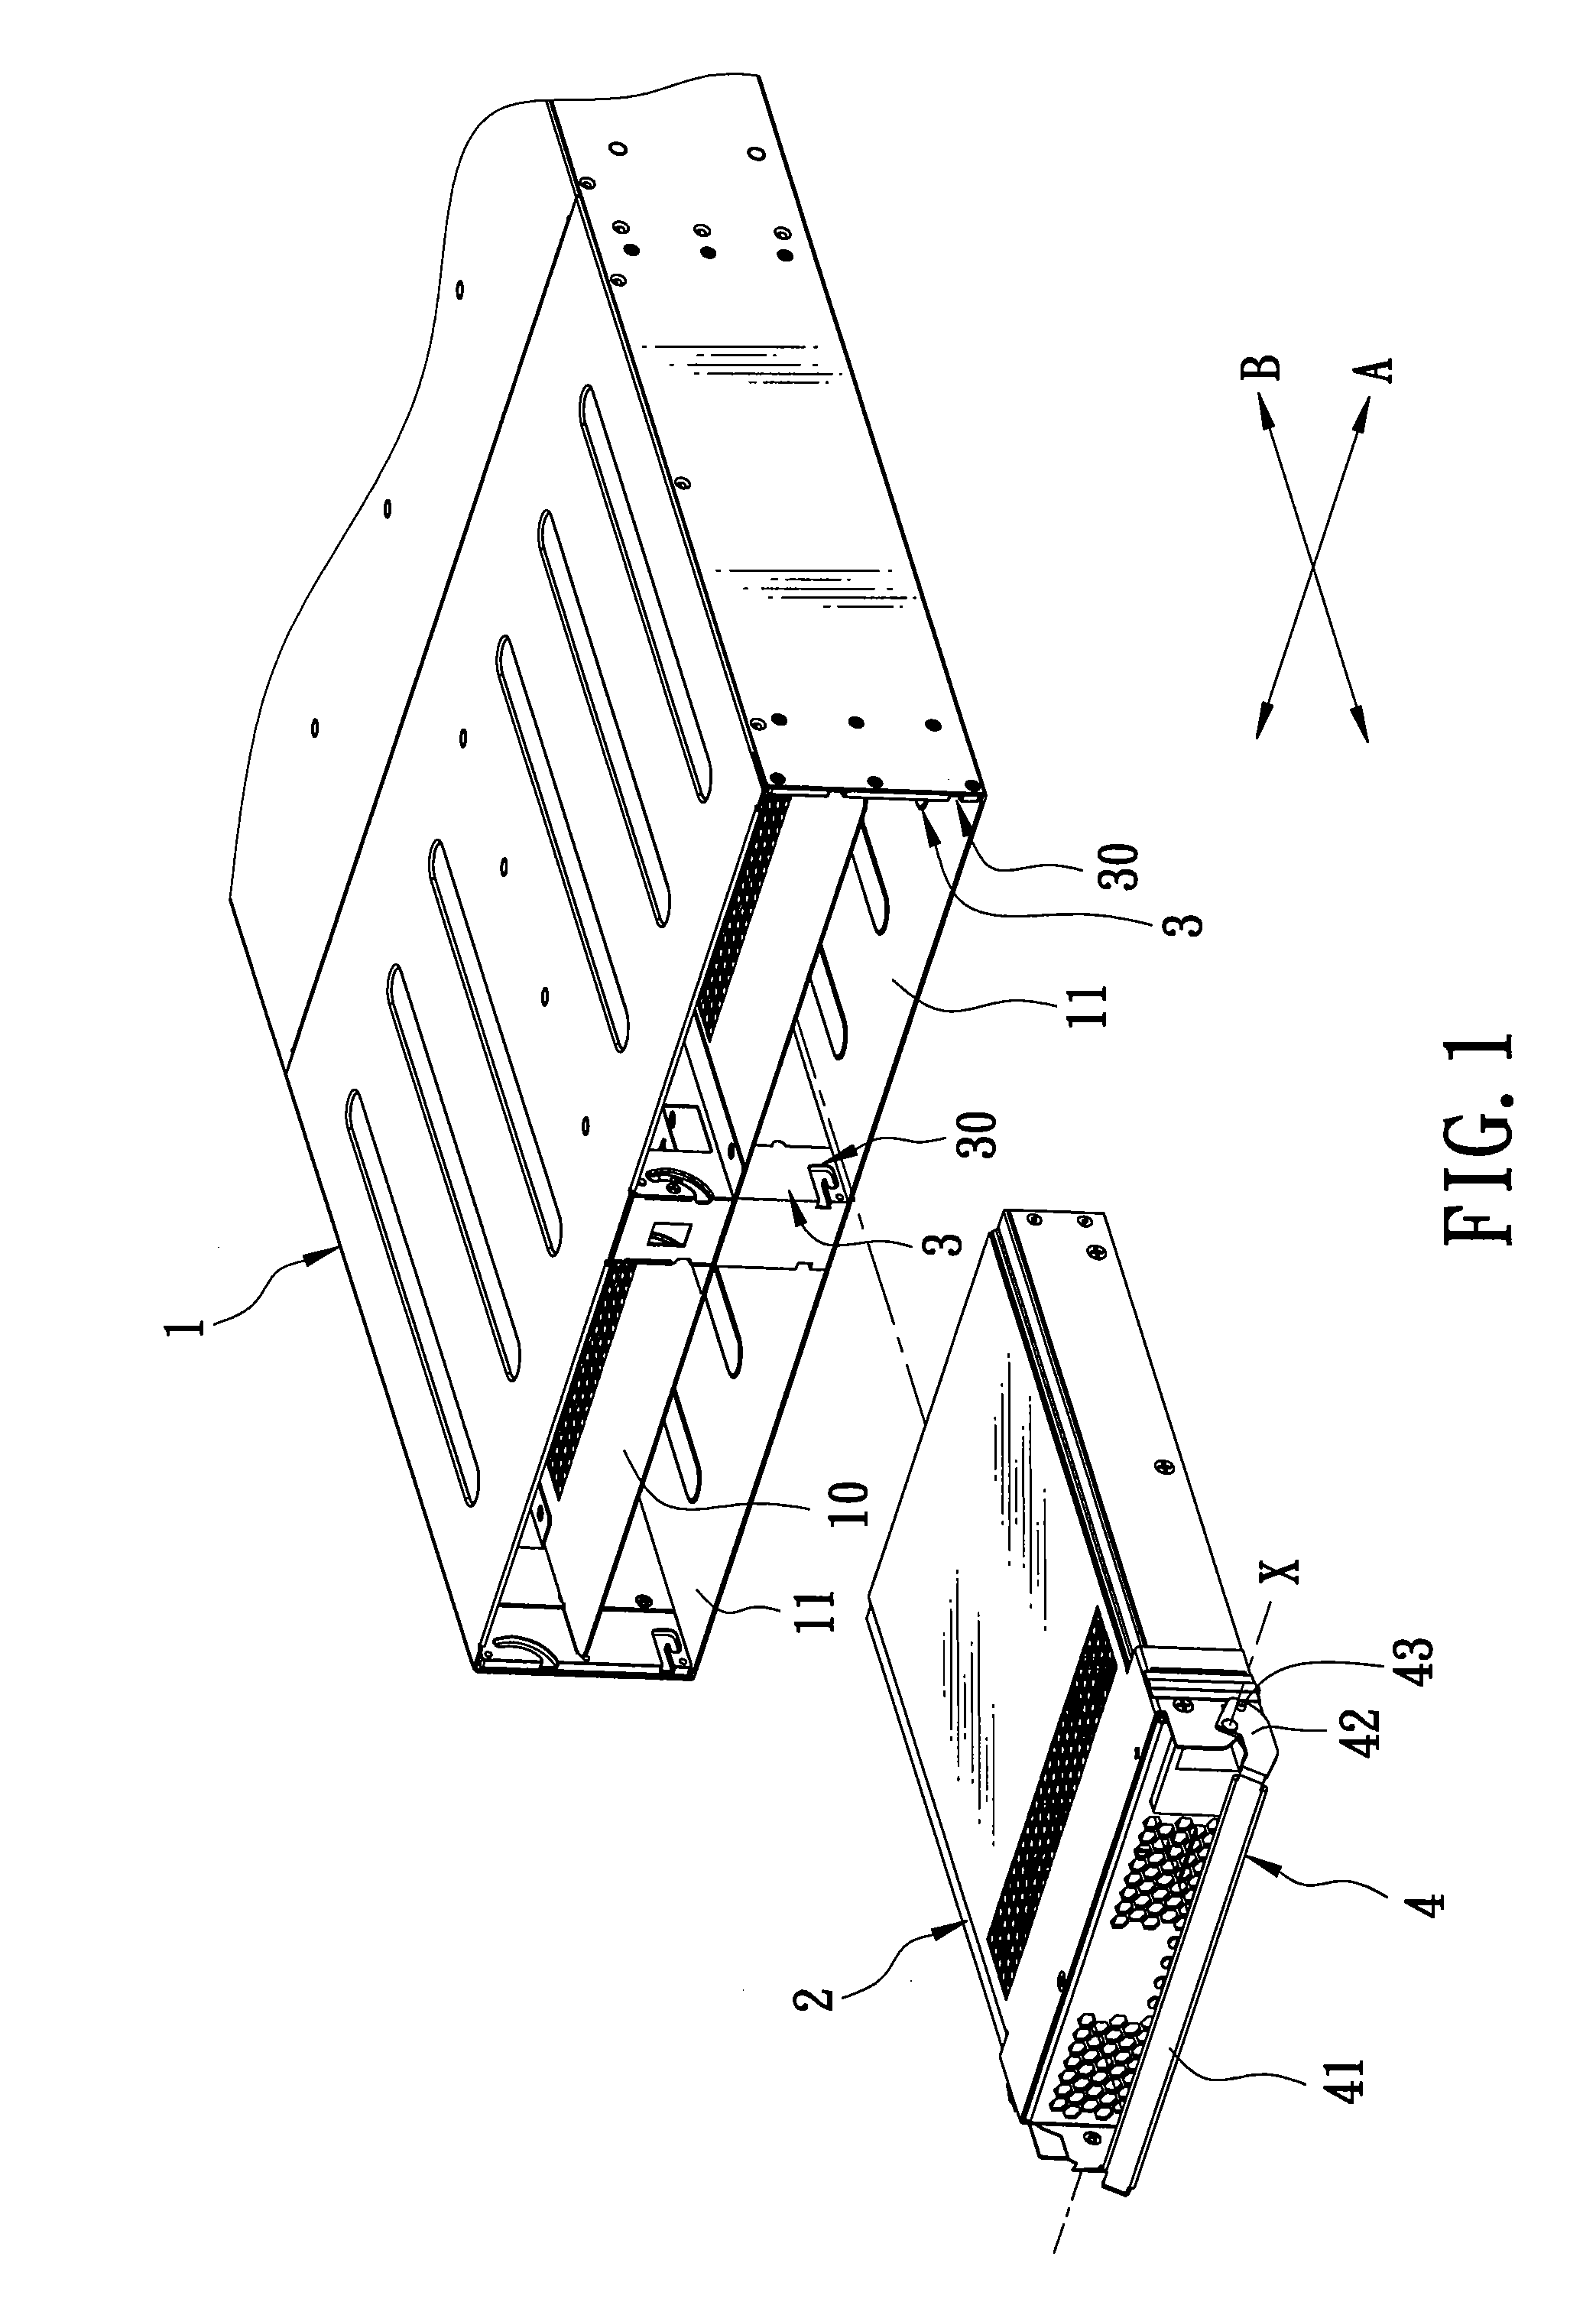 Positioning device adapted for positioning a detachable module in a housing